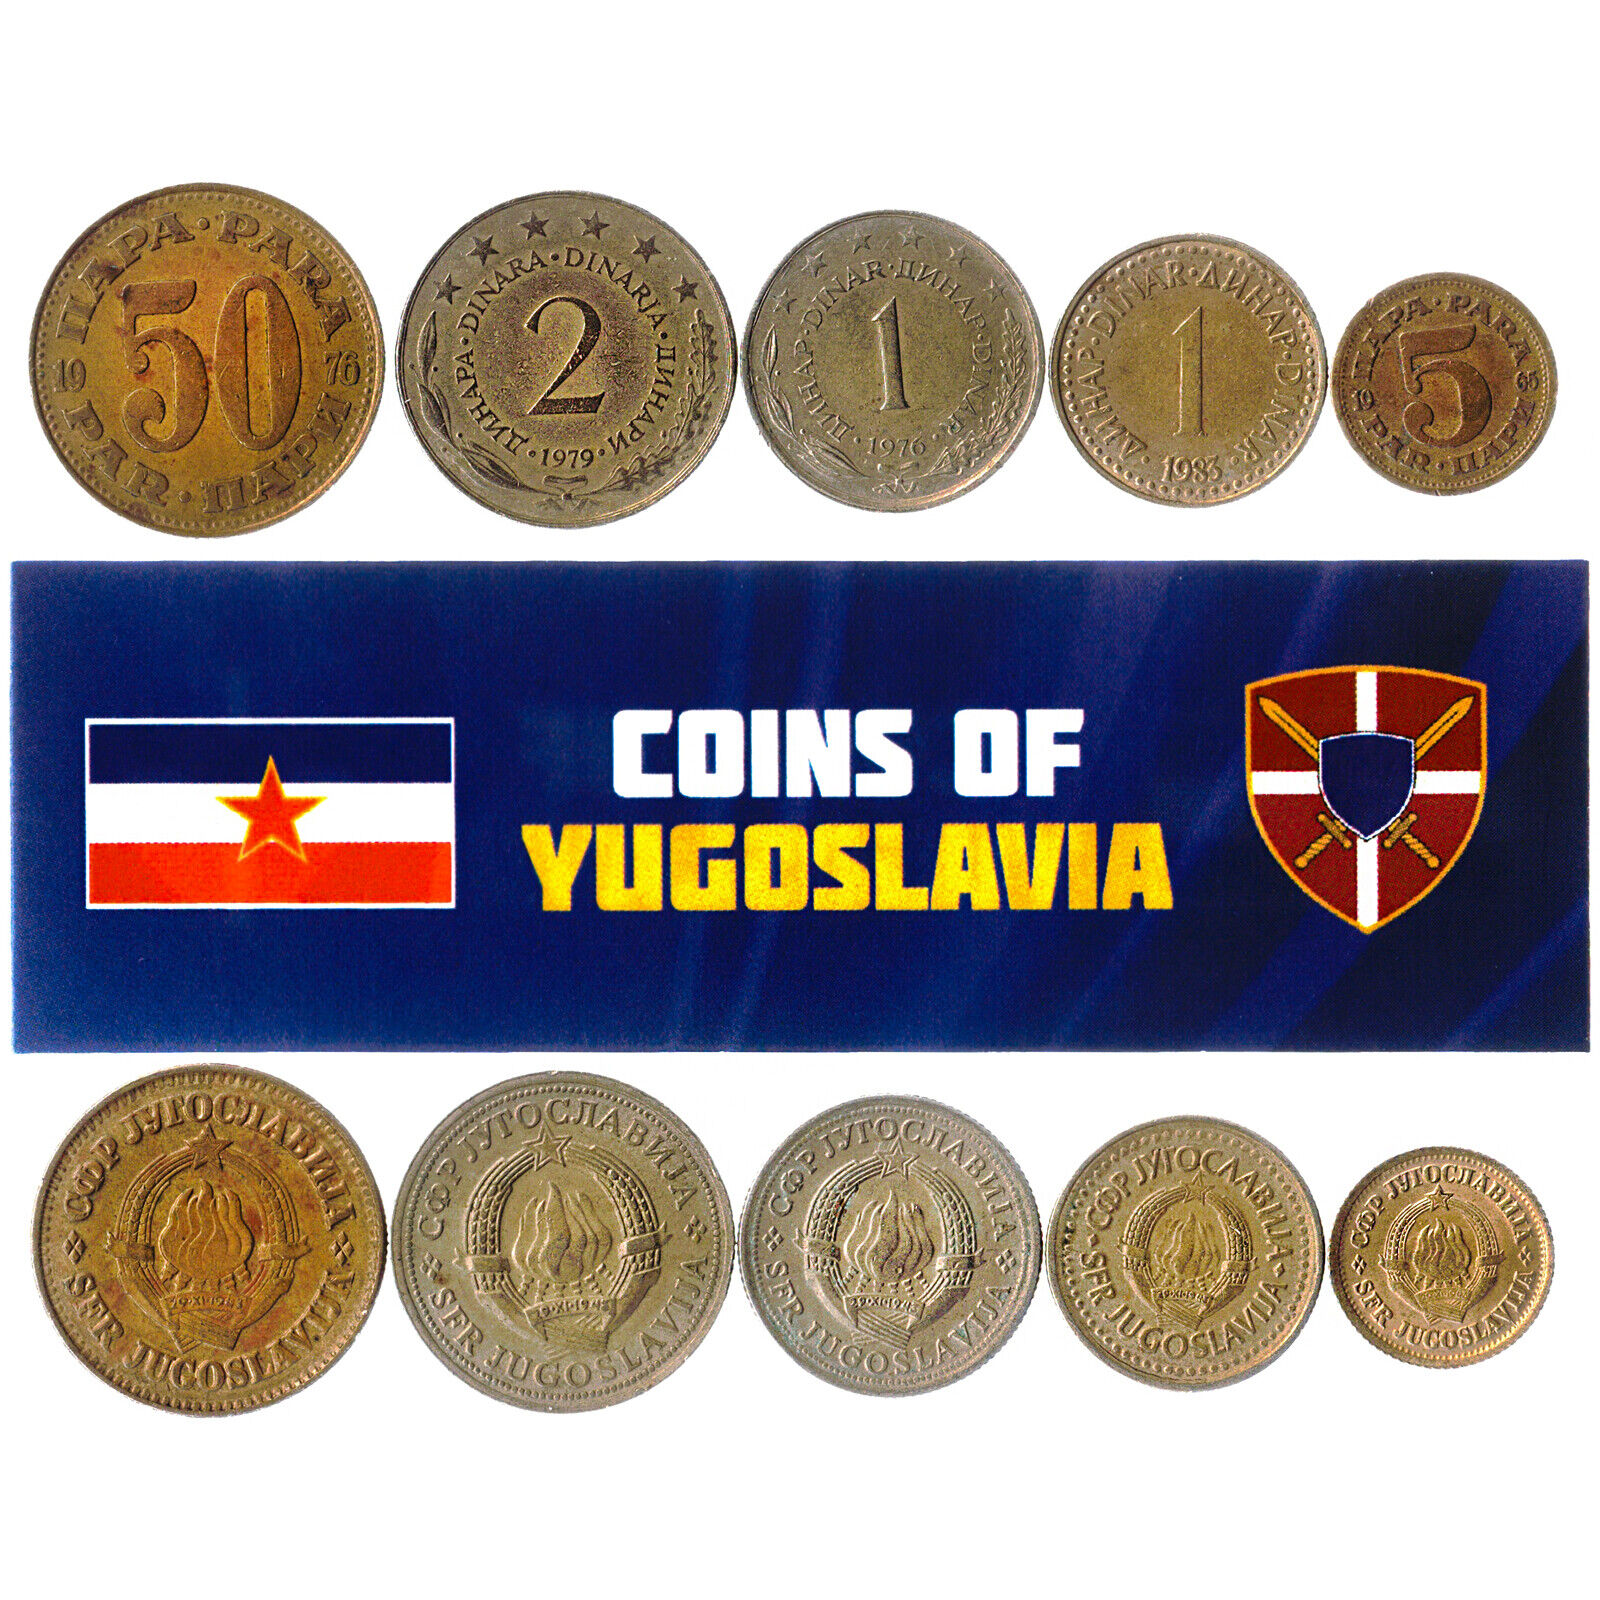 5 YUGOSLAV COINS. EXTINCT COUNTRY IN EUROPE. JUGOSLAVIA COINS FOREIGN CURRENCY Без бренда